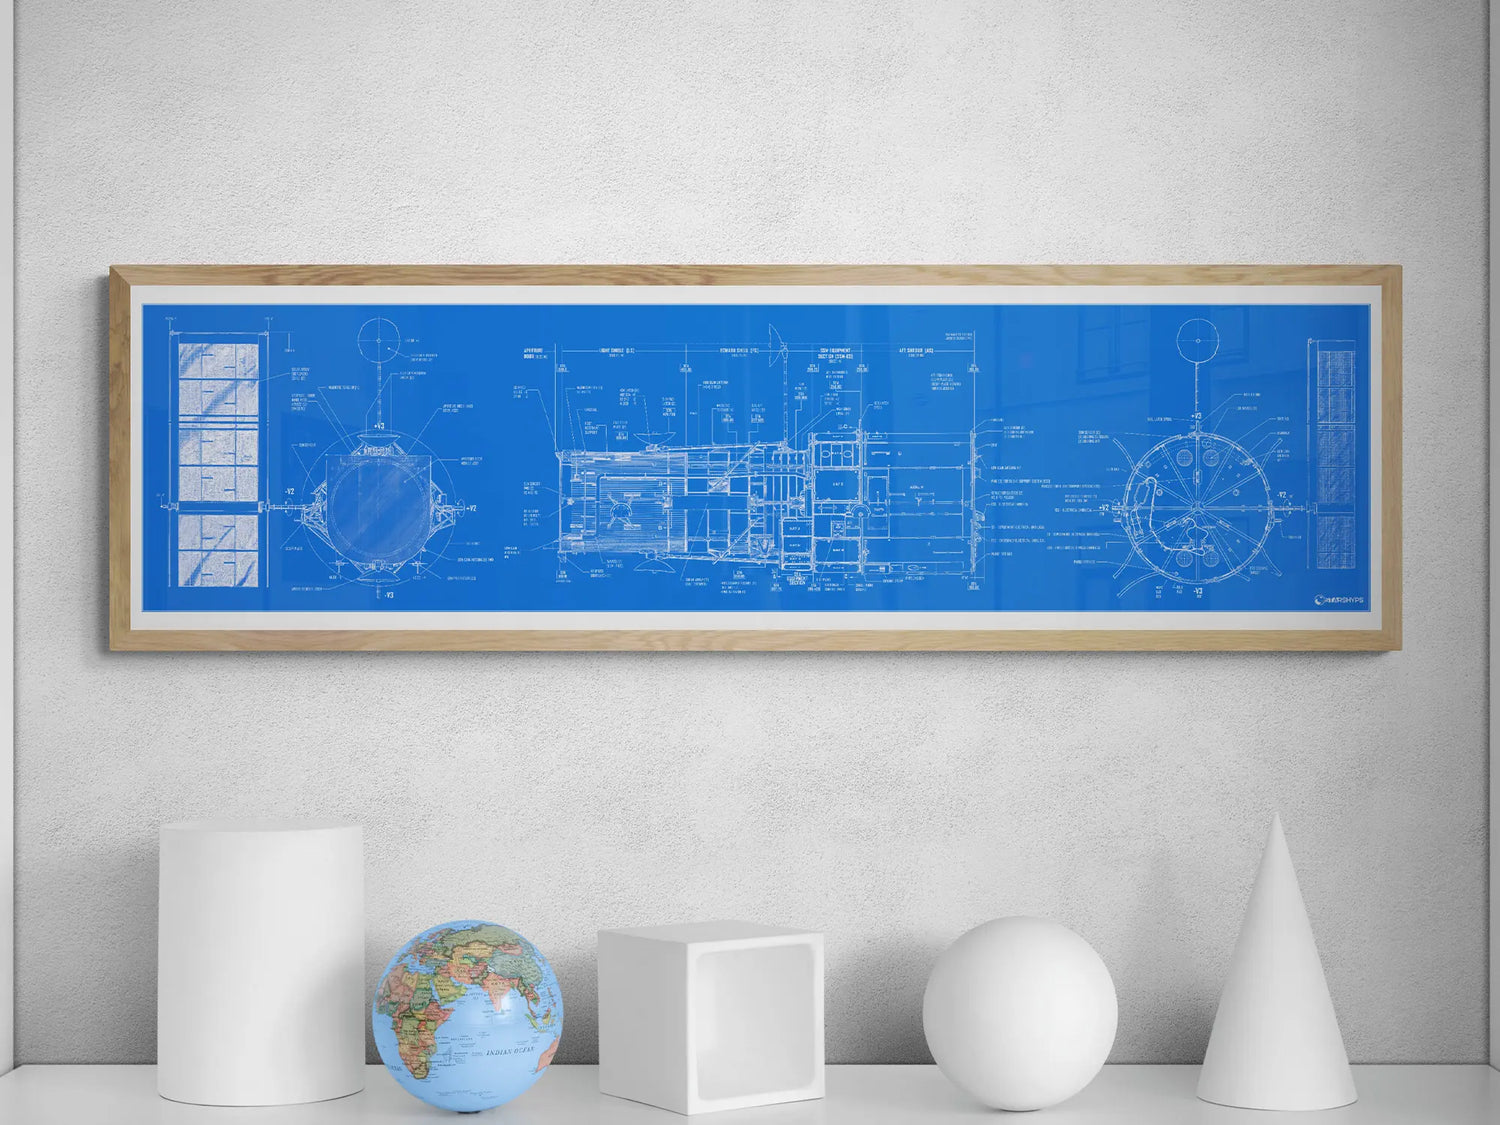 Hubble Space Telescope Blueprint | Rocket Blueprint Posters | A detailed blueprint of the Hubble Space Telescope is framed in light wood and hung on a white wall. The blueprint is blue with white schematic drawings and labels. Below the frame, a white shelf holds a simple collection of objects: a white cylinder, a globe, a white cube, and a white cone.